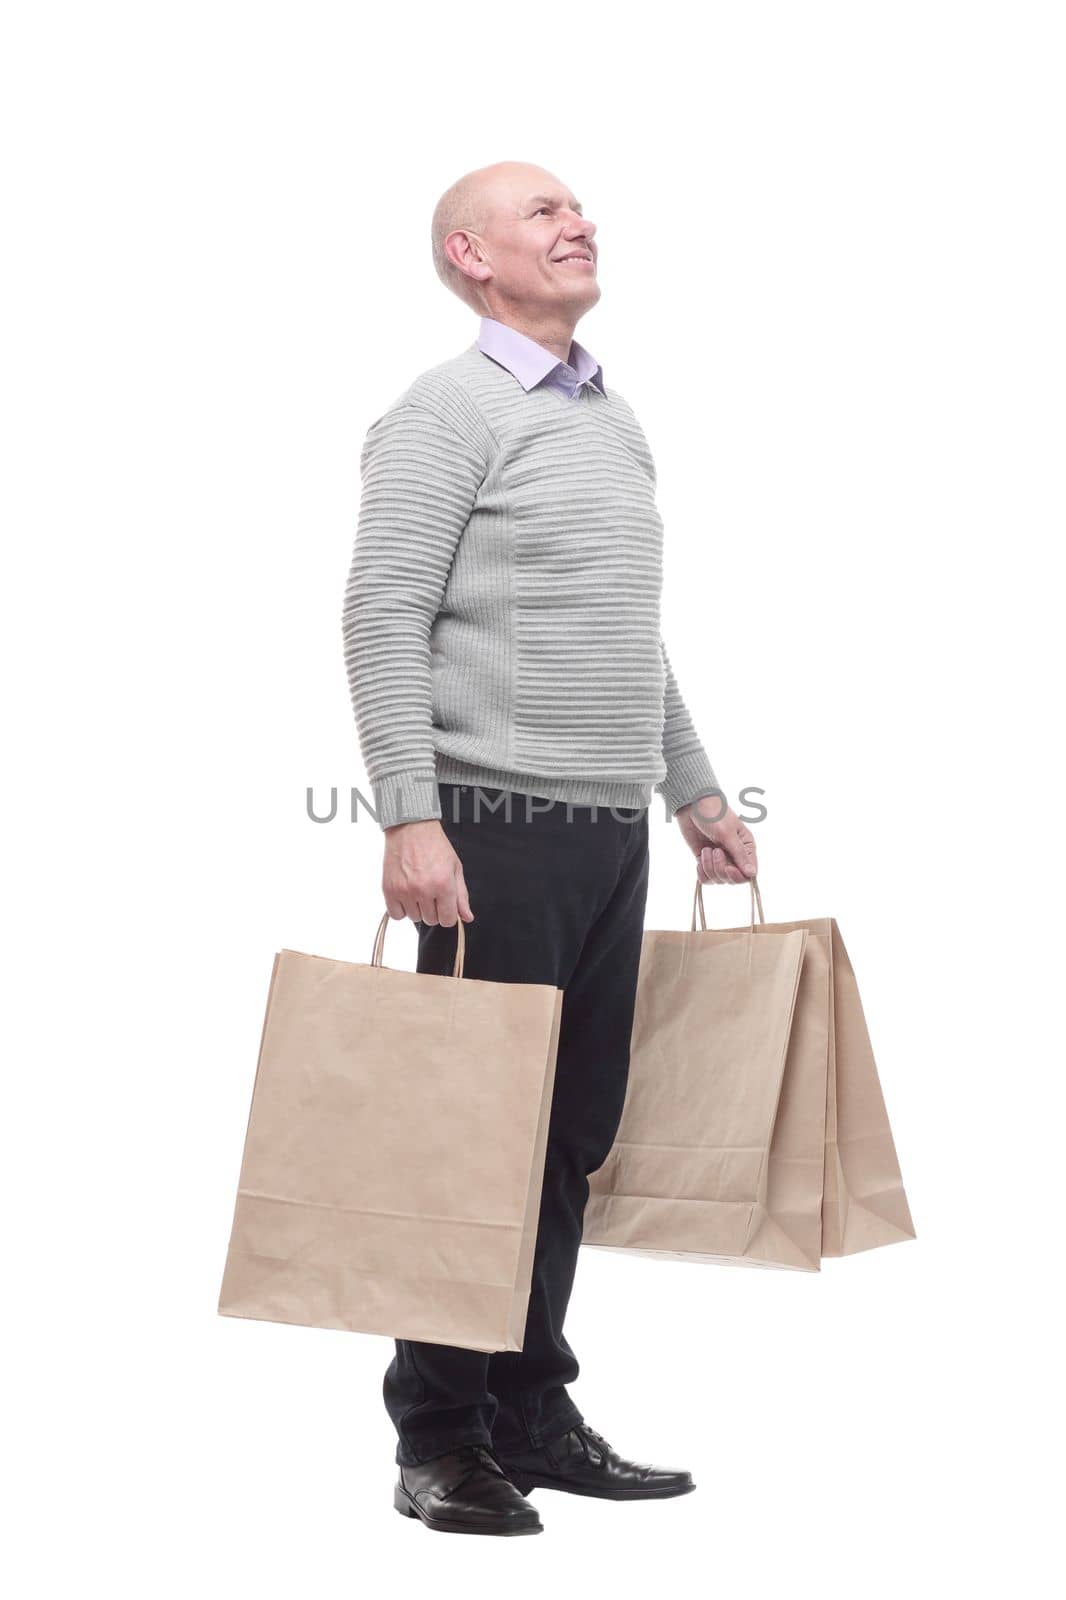 in full growth. happy man with shopping bags. isolated on a white background.